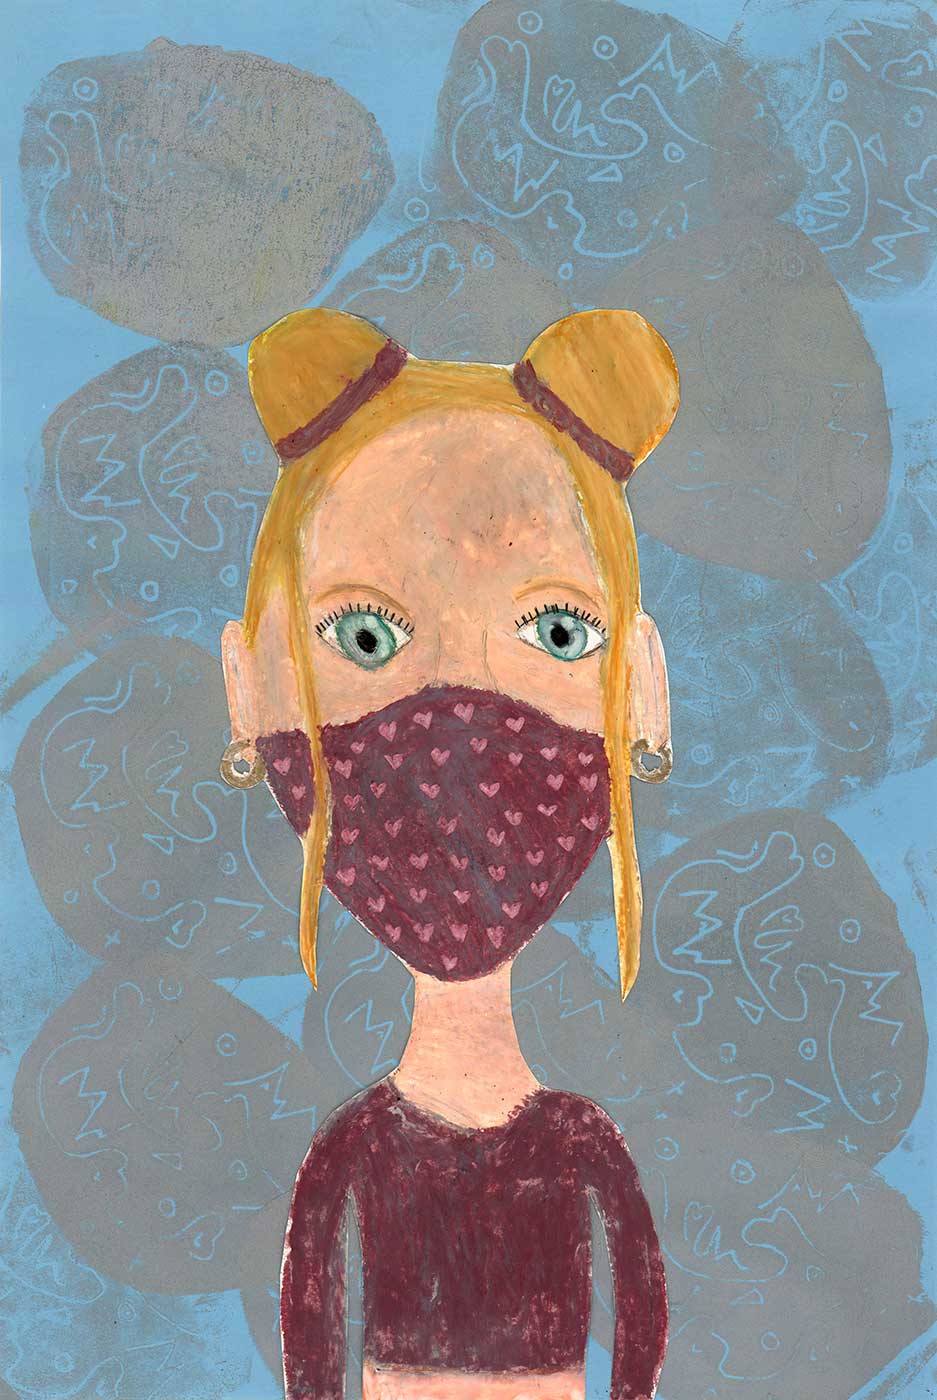 Portrait of a light-skinned blonde tween wearing their hair up in two buns held by burgundy hair ties. The person is wearing a matching mask and top and is presented in front of a blue and silver background.